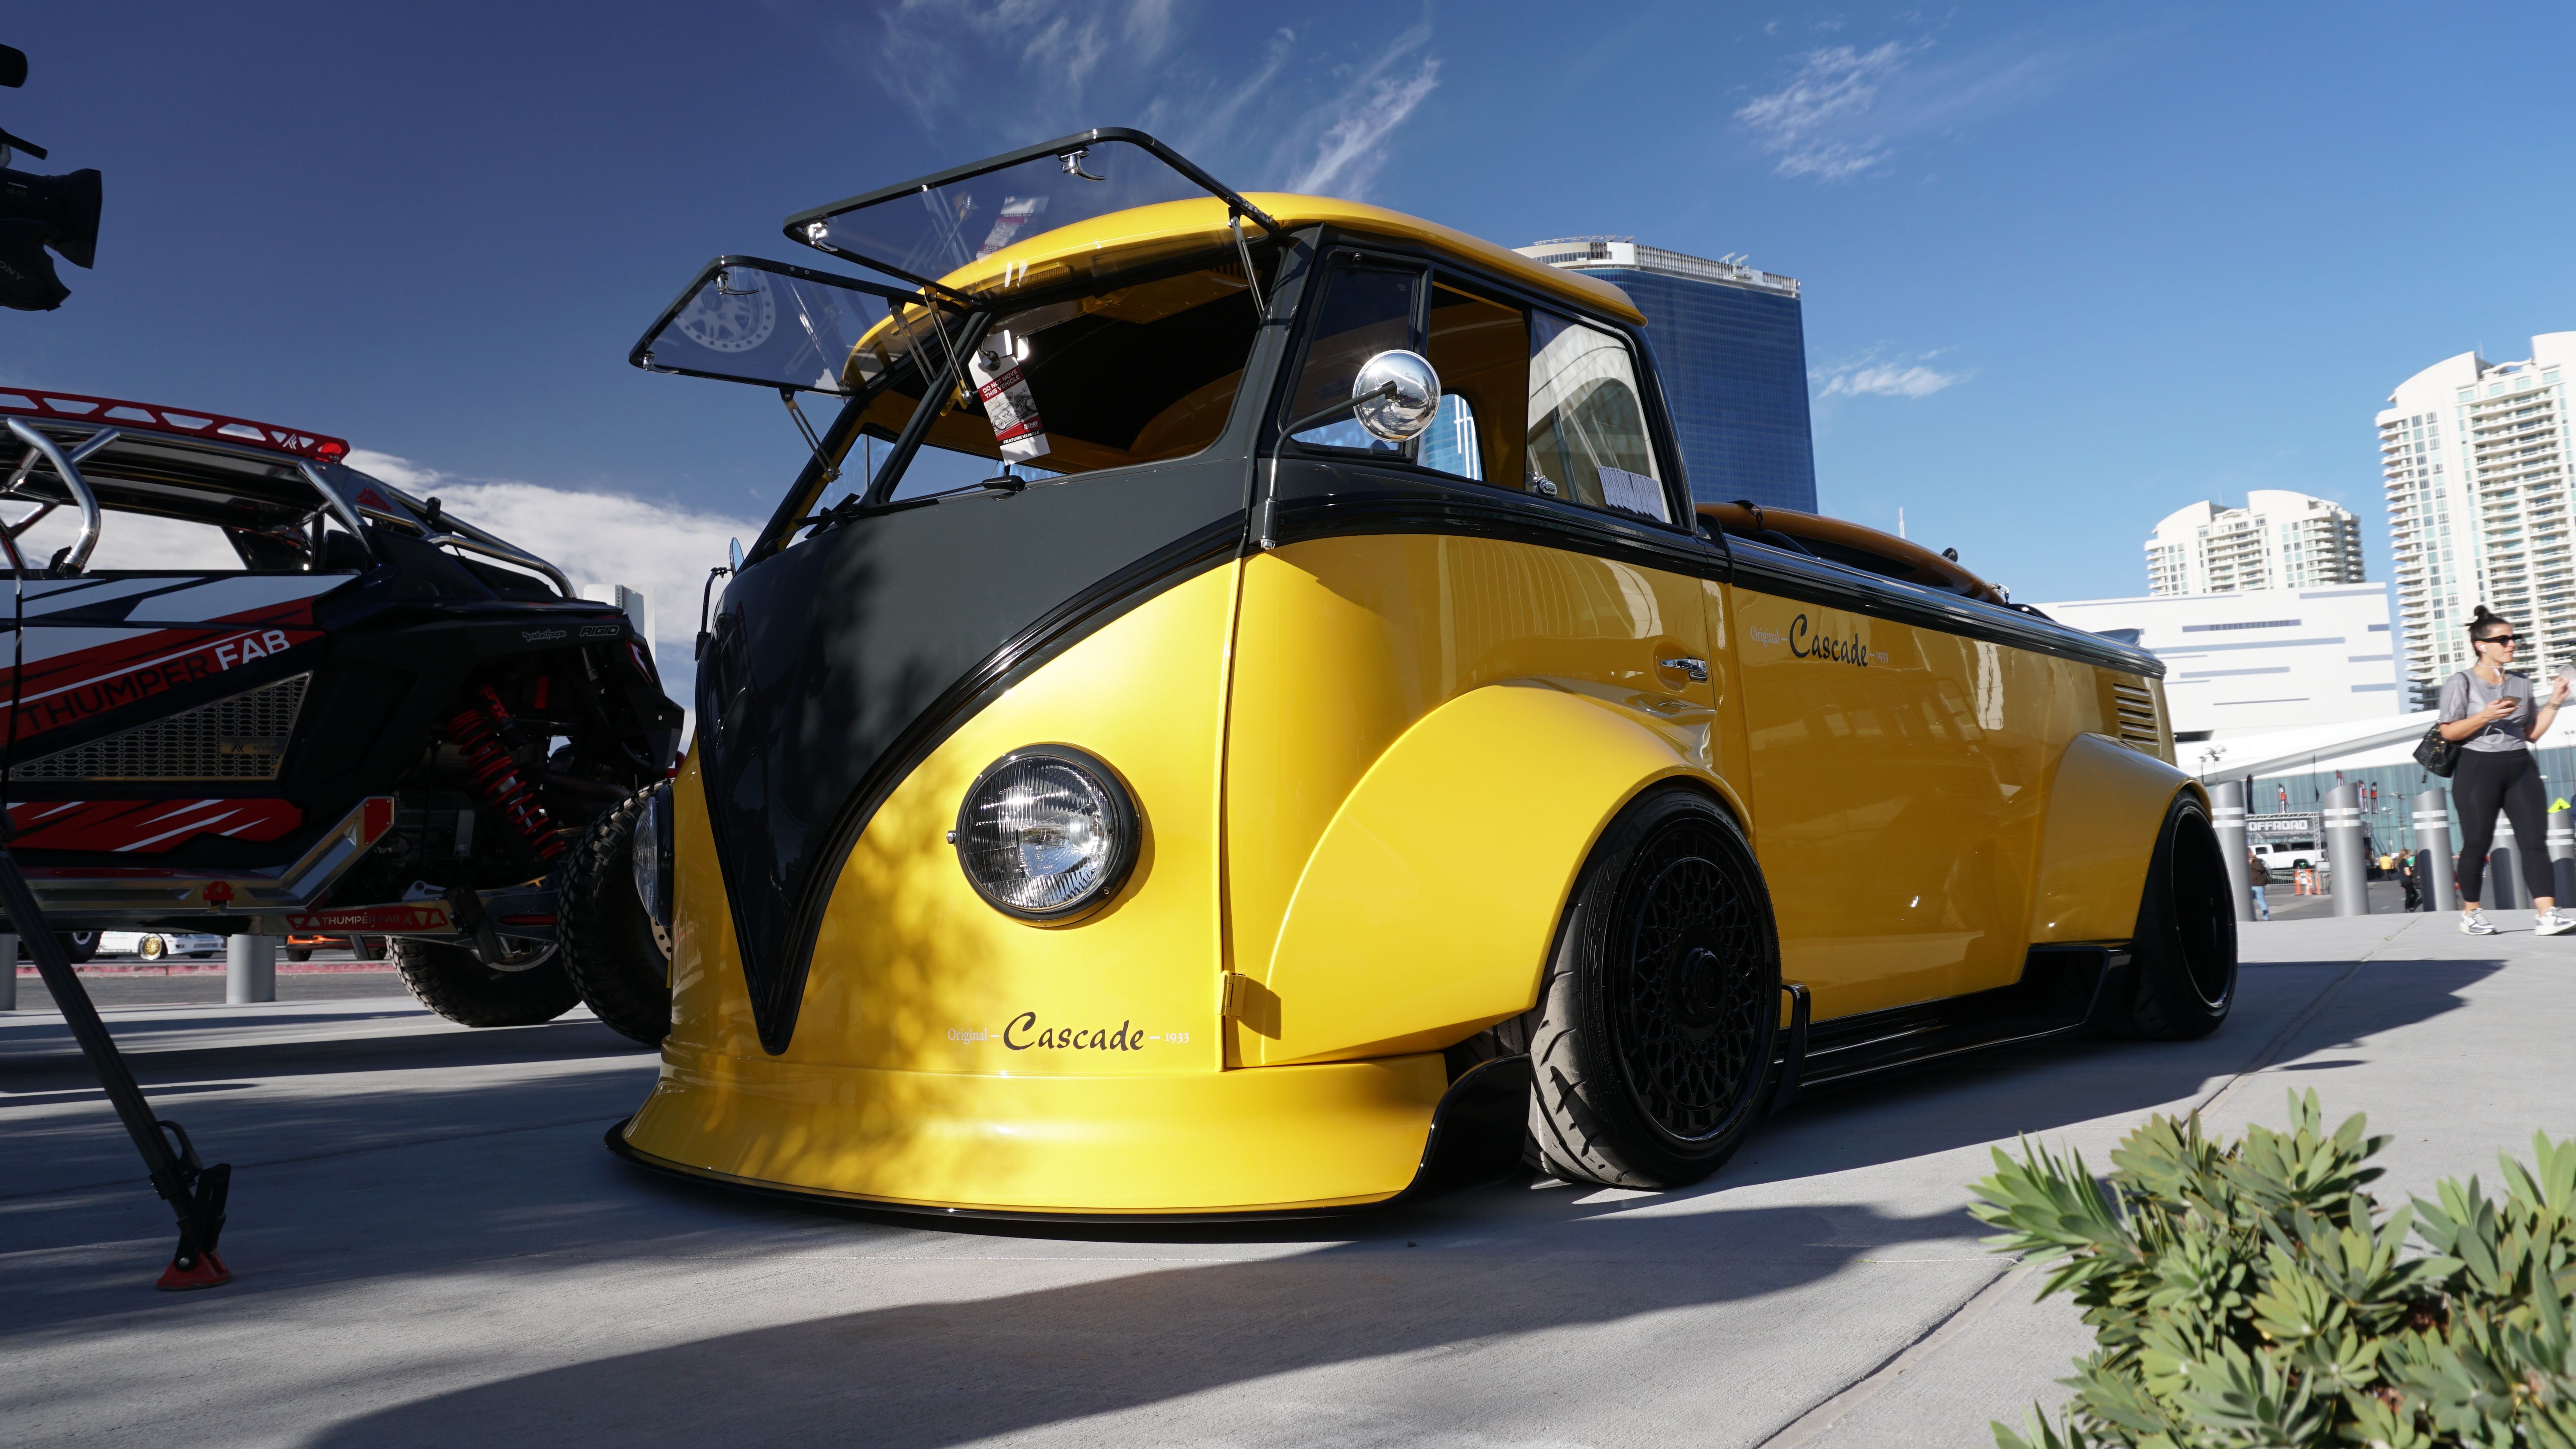 kubiek toevoegen vis Check Out These Lowered, Widebody VW Vans from the 2022 SEMA Show